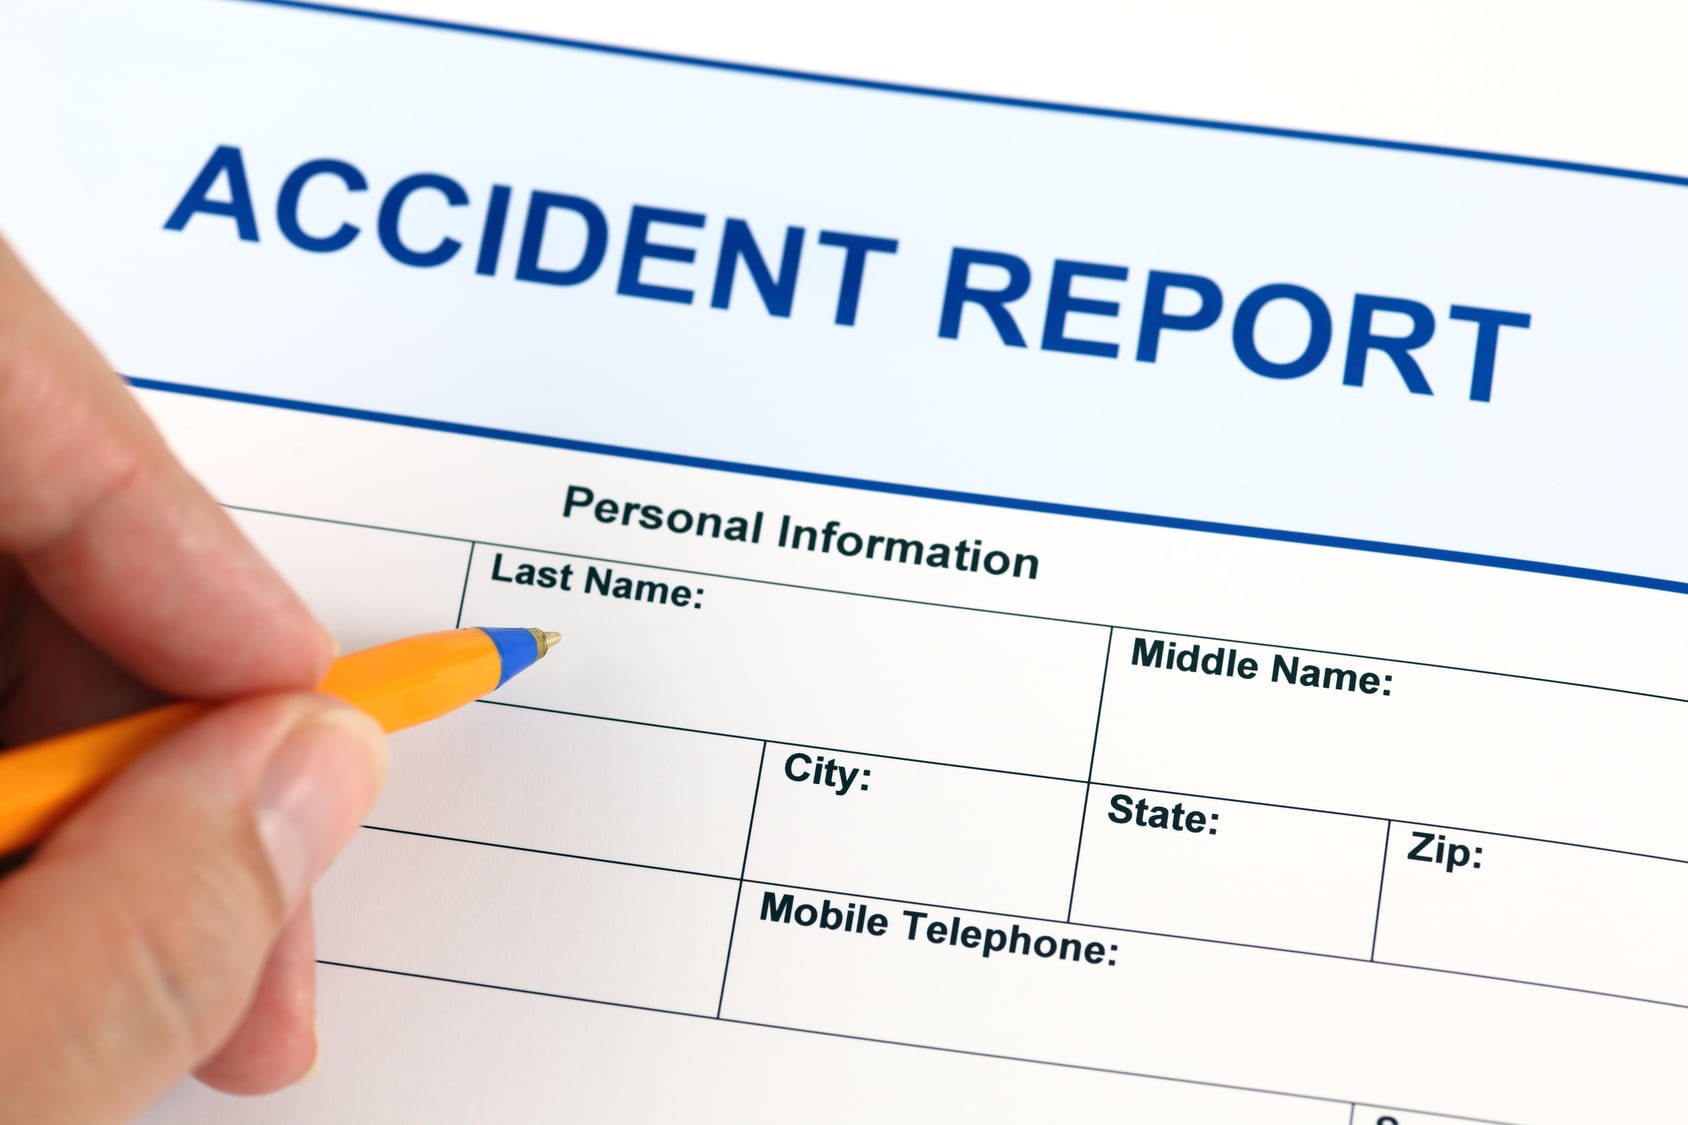 Accident report application form